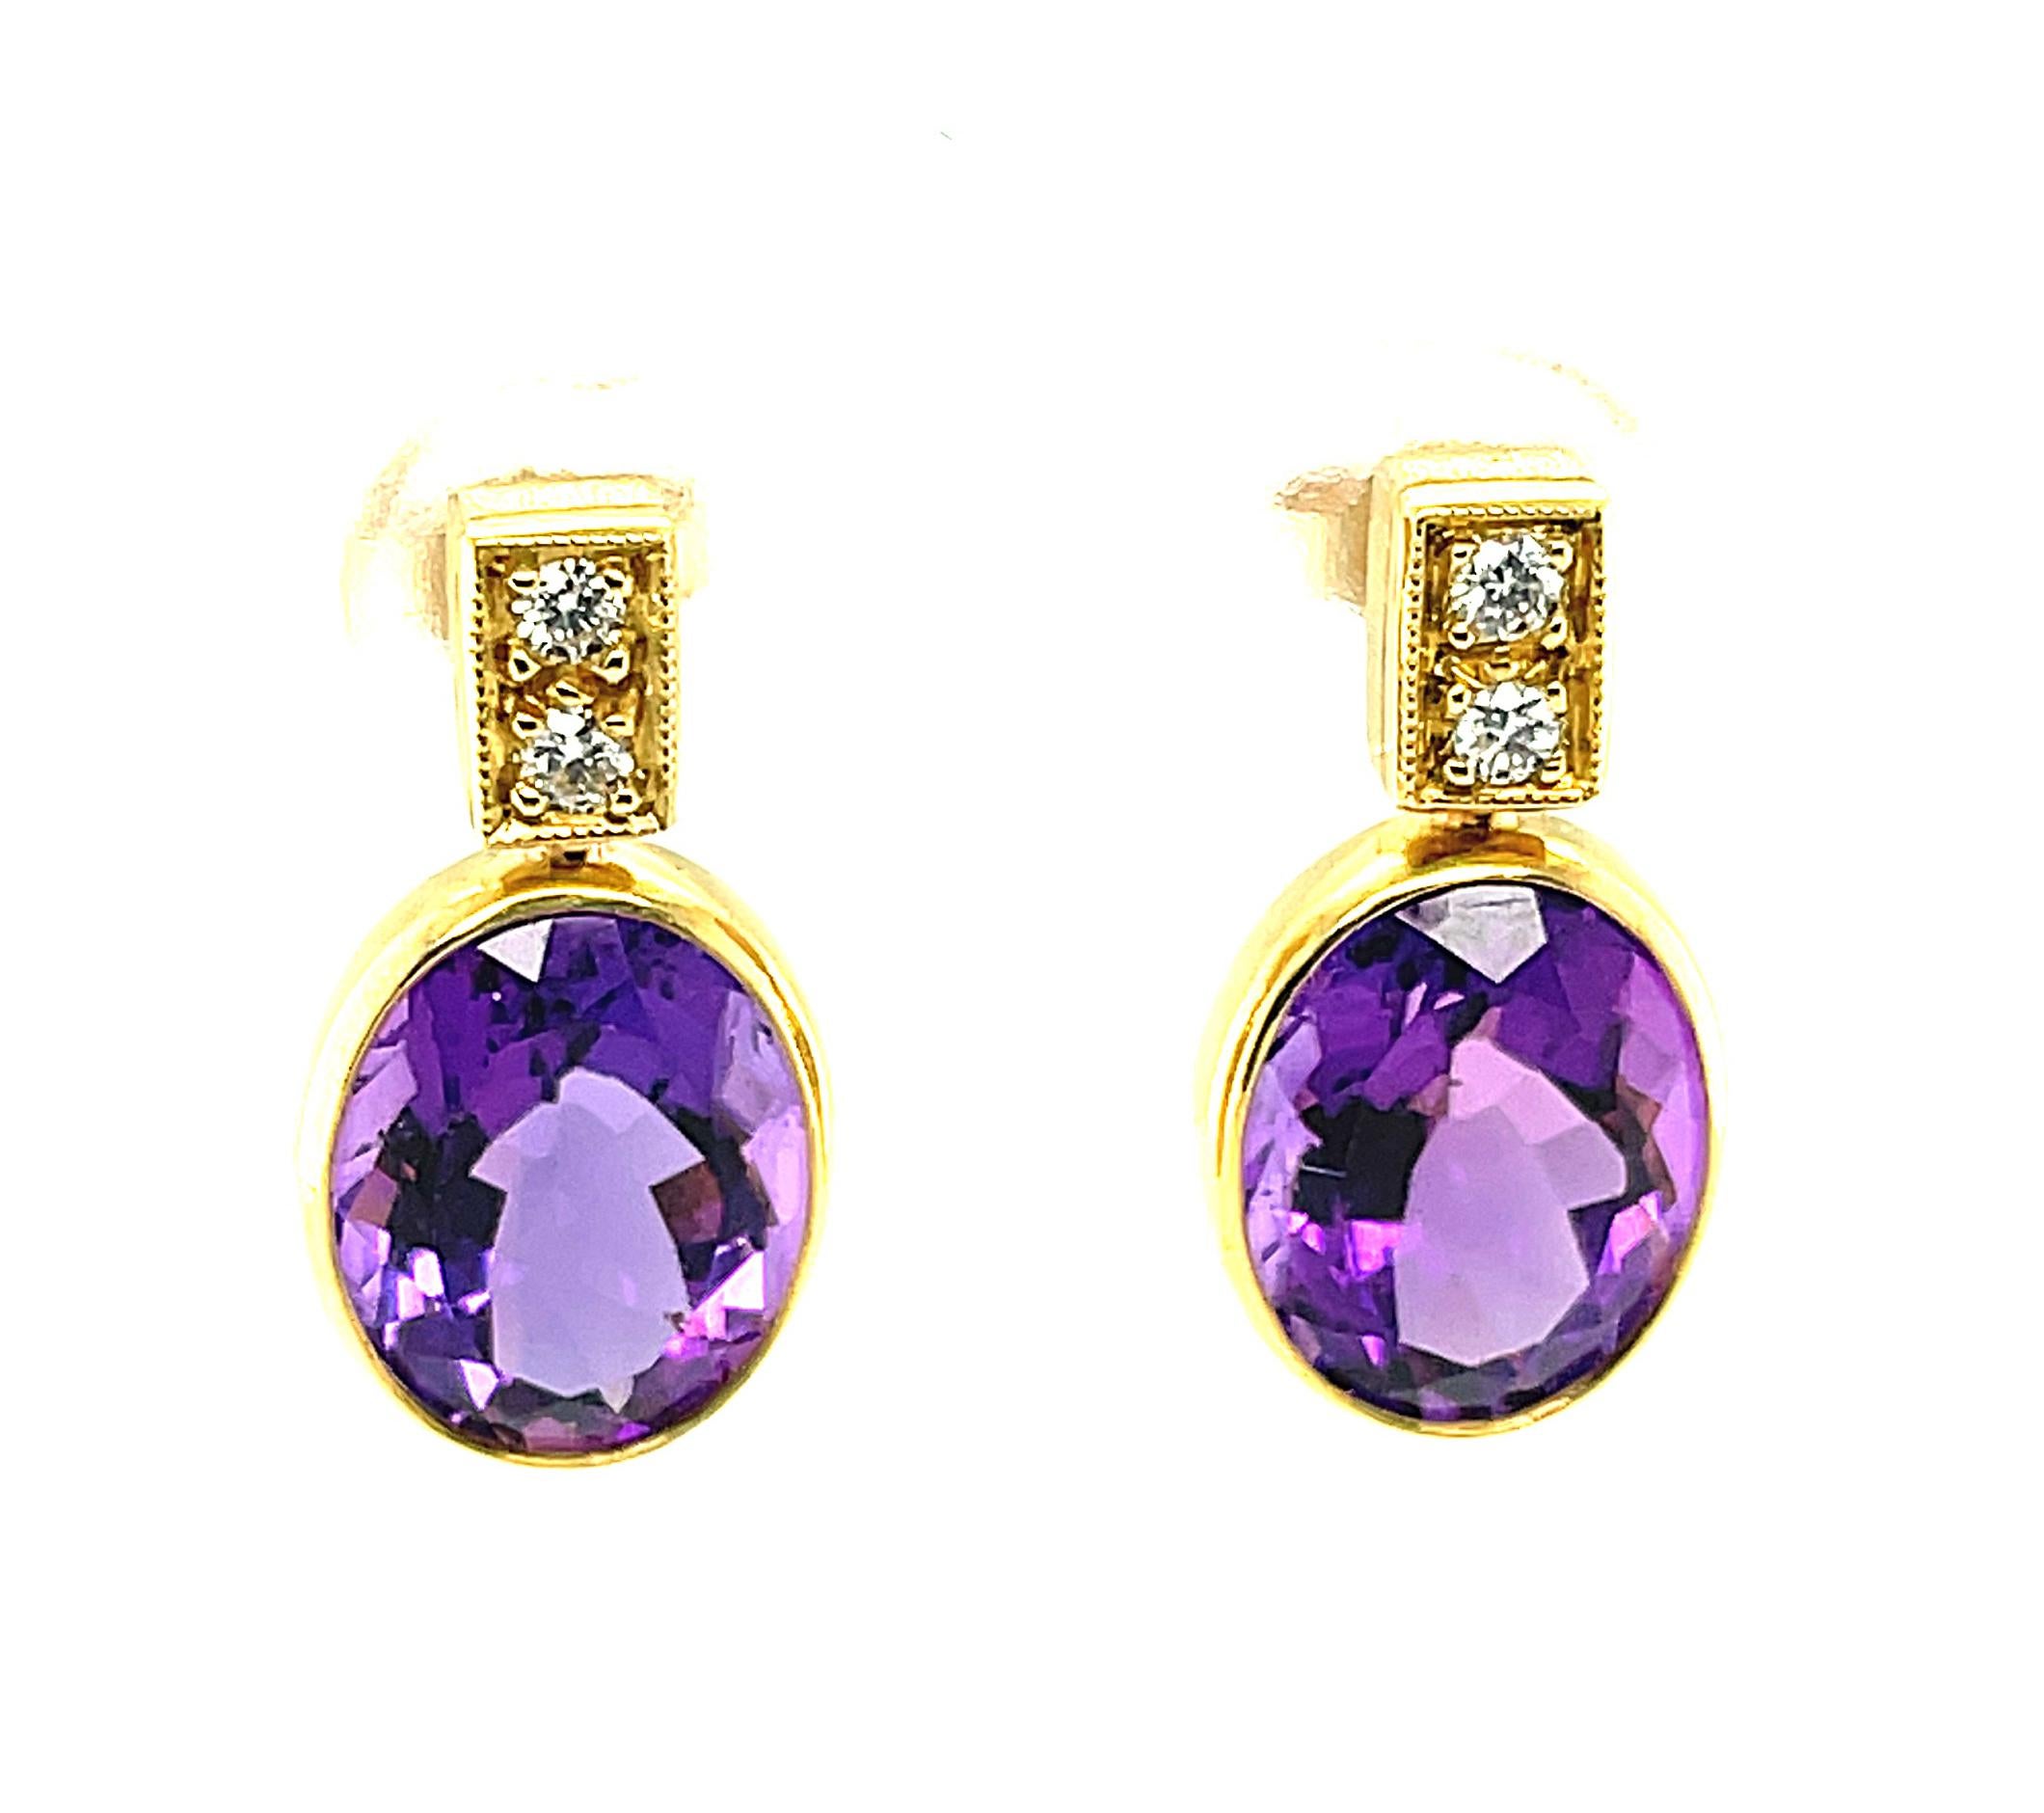 These stunning drop earrings feature rich purple amethysts and brilliant diamonds in a design that will add everyday elegance to your wardrobe! Stylish and modern but with timeless appeal, we designed these beautiful earrings to be positioned